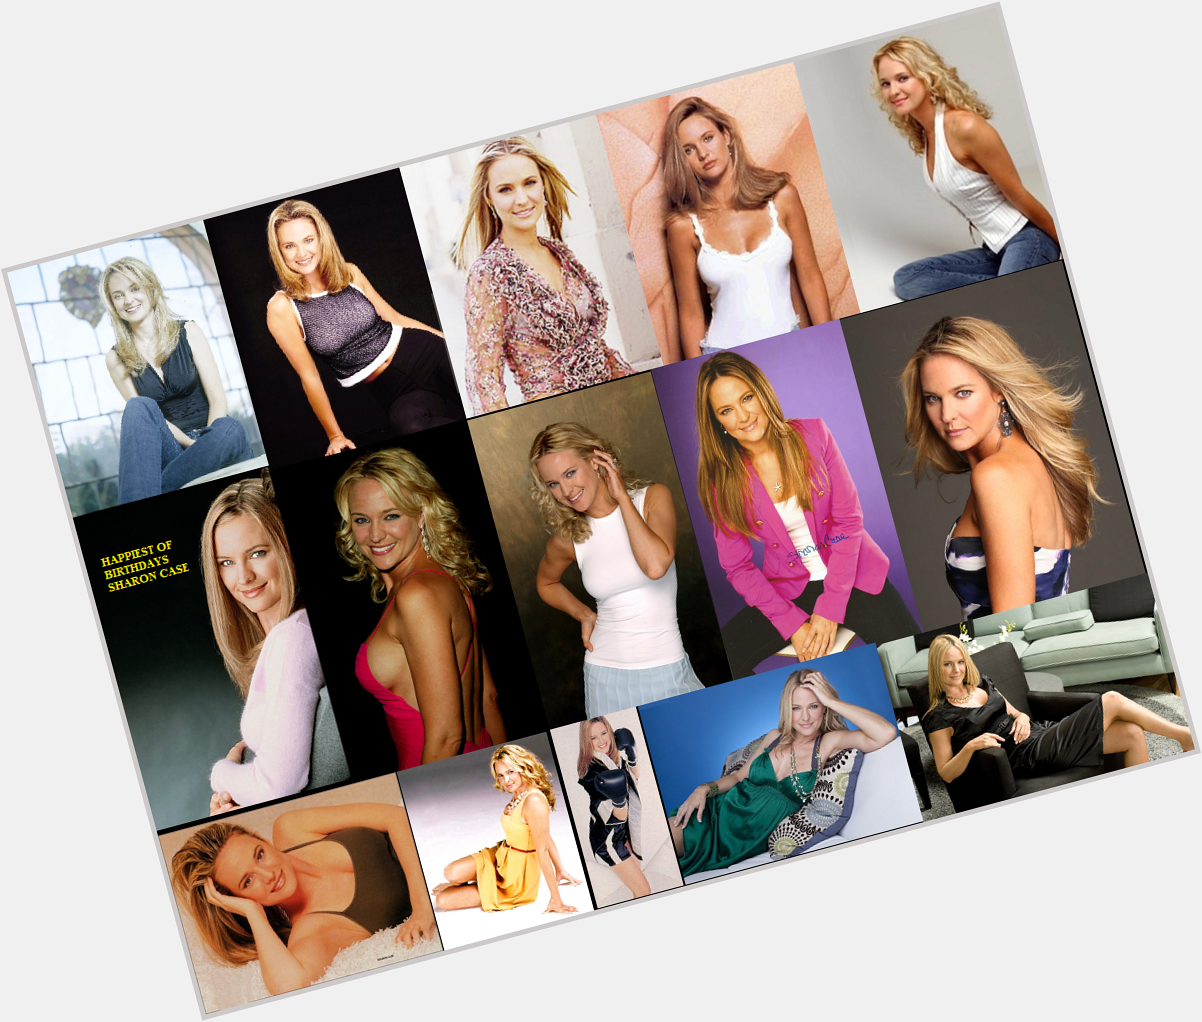  Happy Birthday Sharon Case:) you just get better and better as the years pass hope it is your best year 